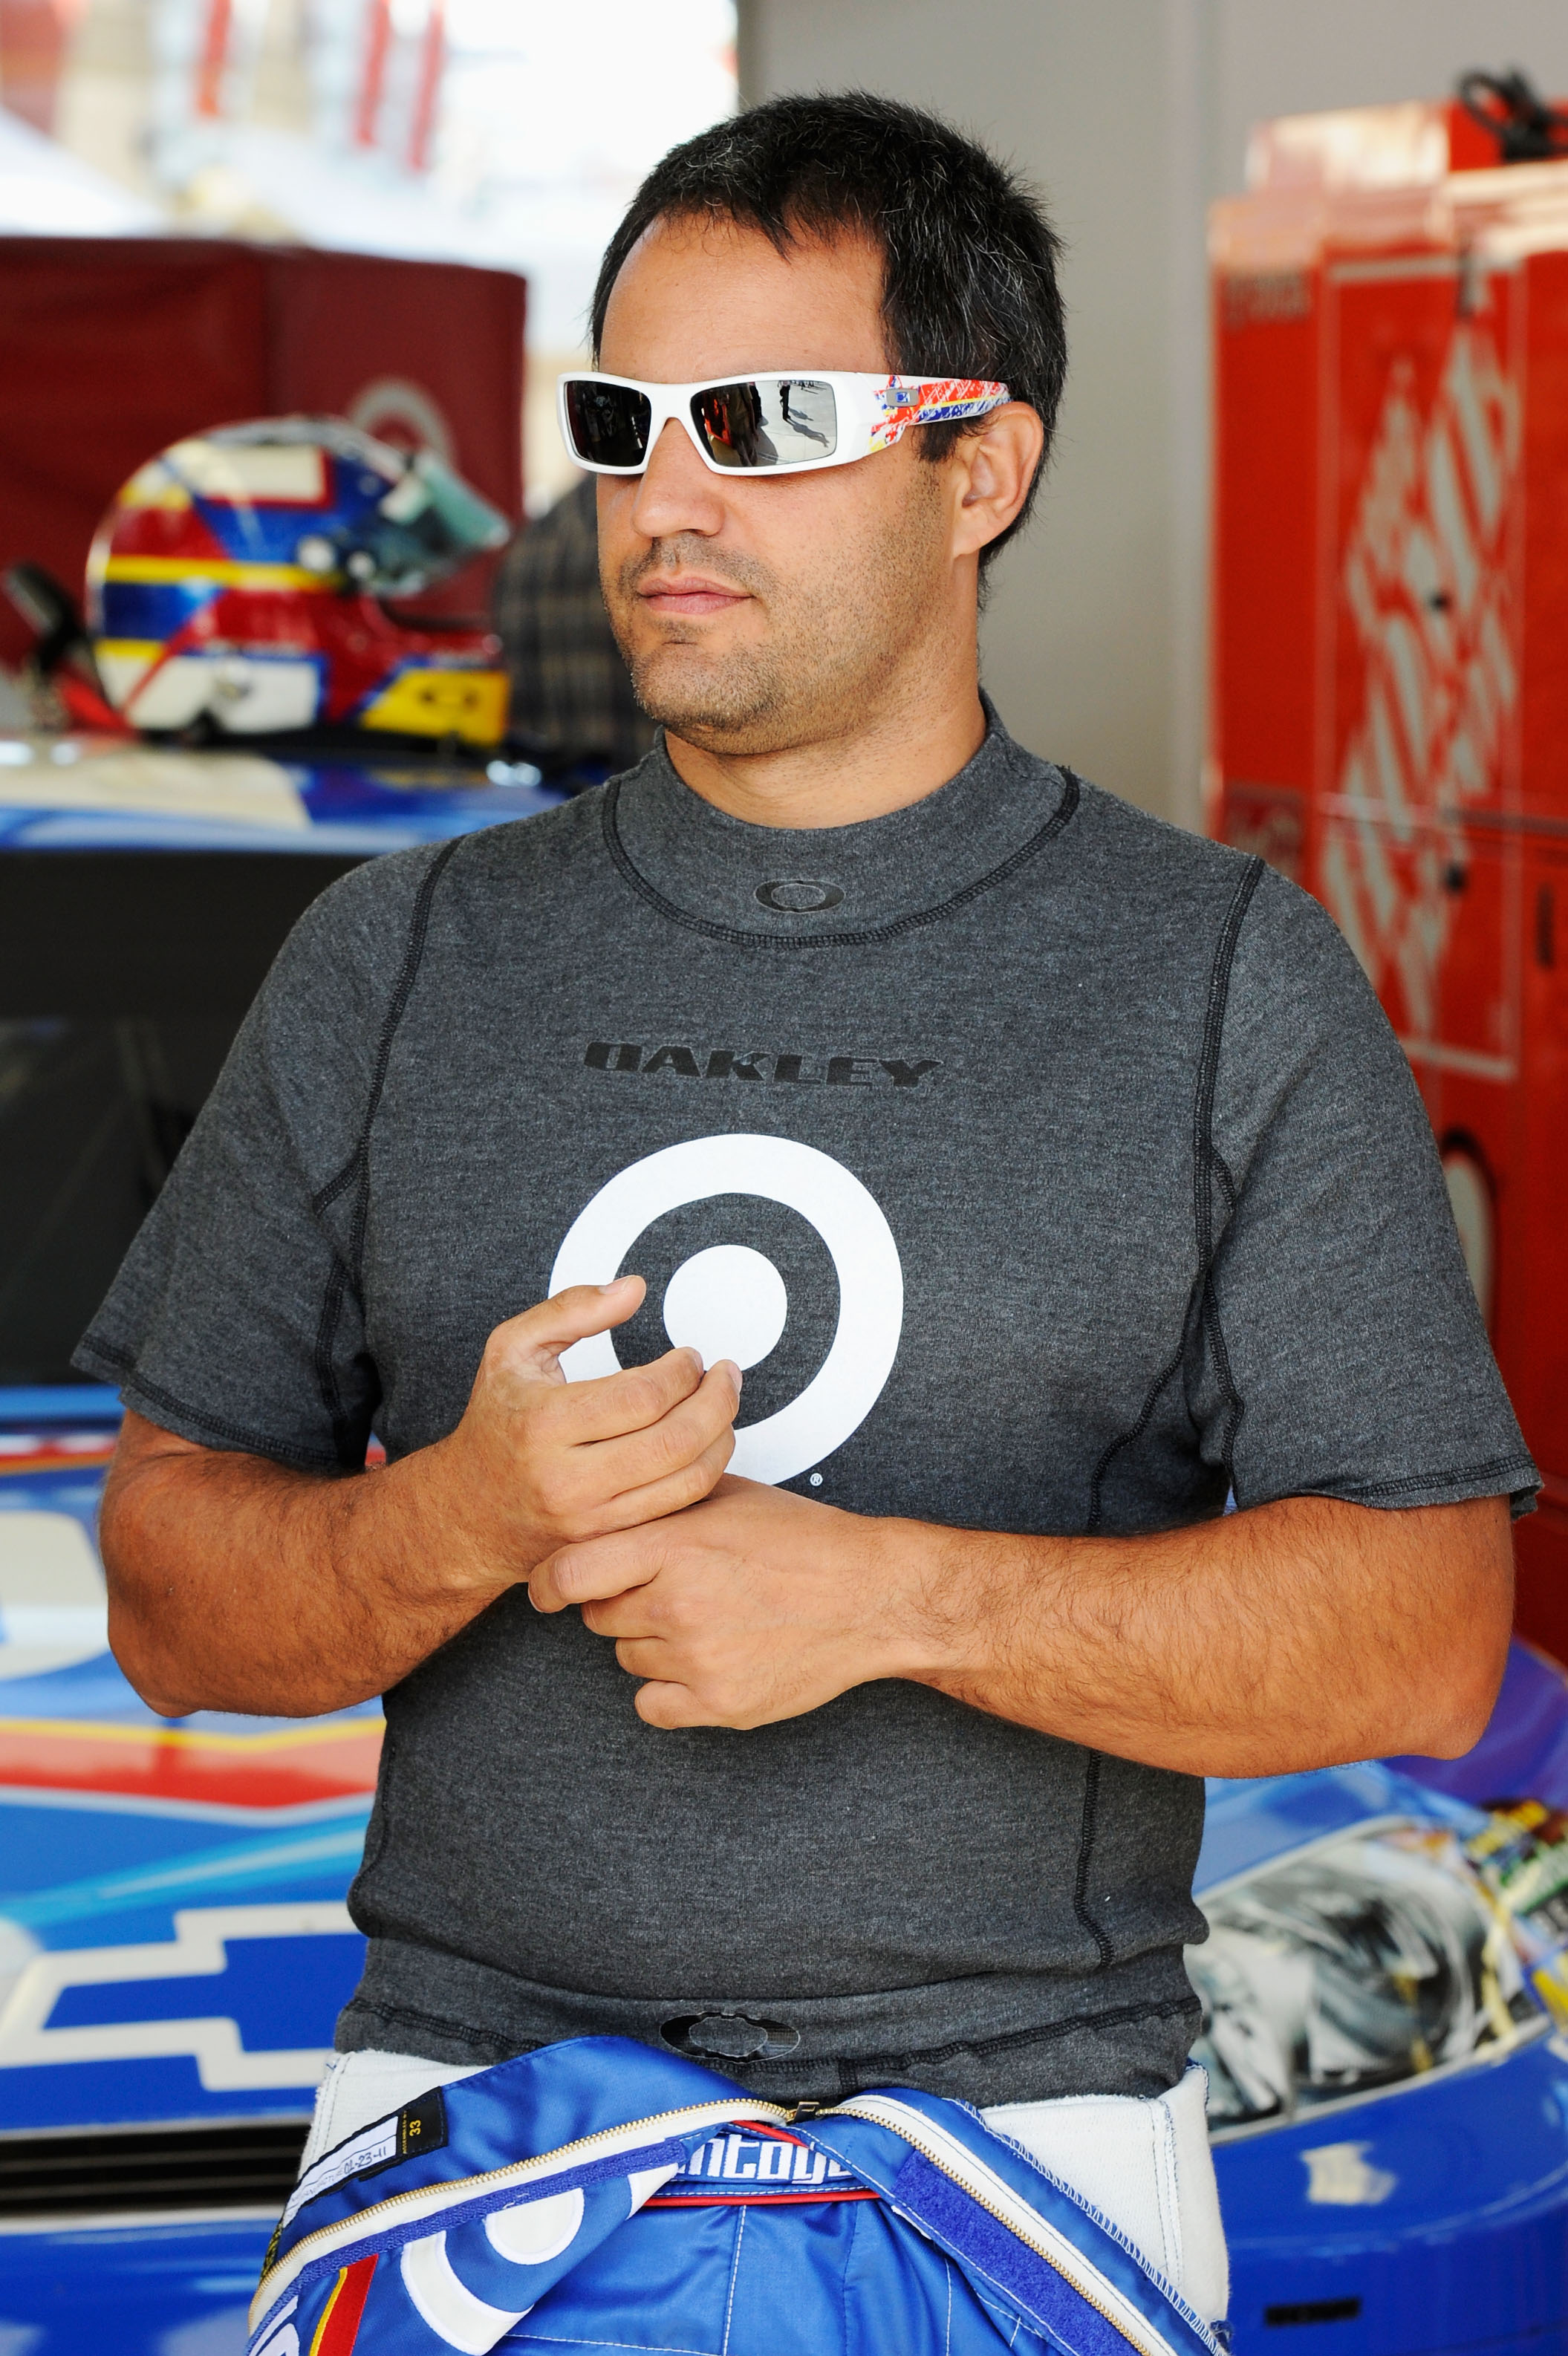 LAS VEGAS, NV - MARCH 05:  Juan Pablo Montoya, driver of the #42 Clorox Chevrolet, walks in the garage during practice for the NASCAR Sprint Cup Series Kobalt Tools 400 at Las Vegas Motor Speedway on March 5, 2011 in Las Vegas, Nevada.  (Photo by John Har